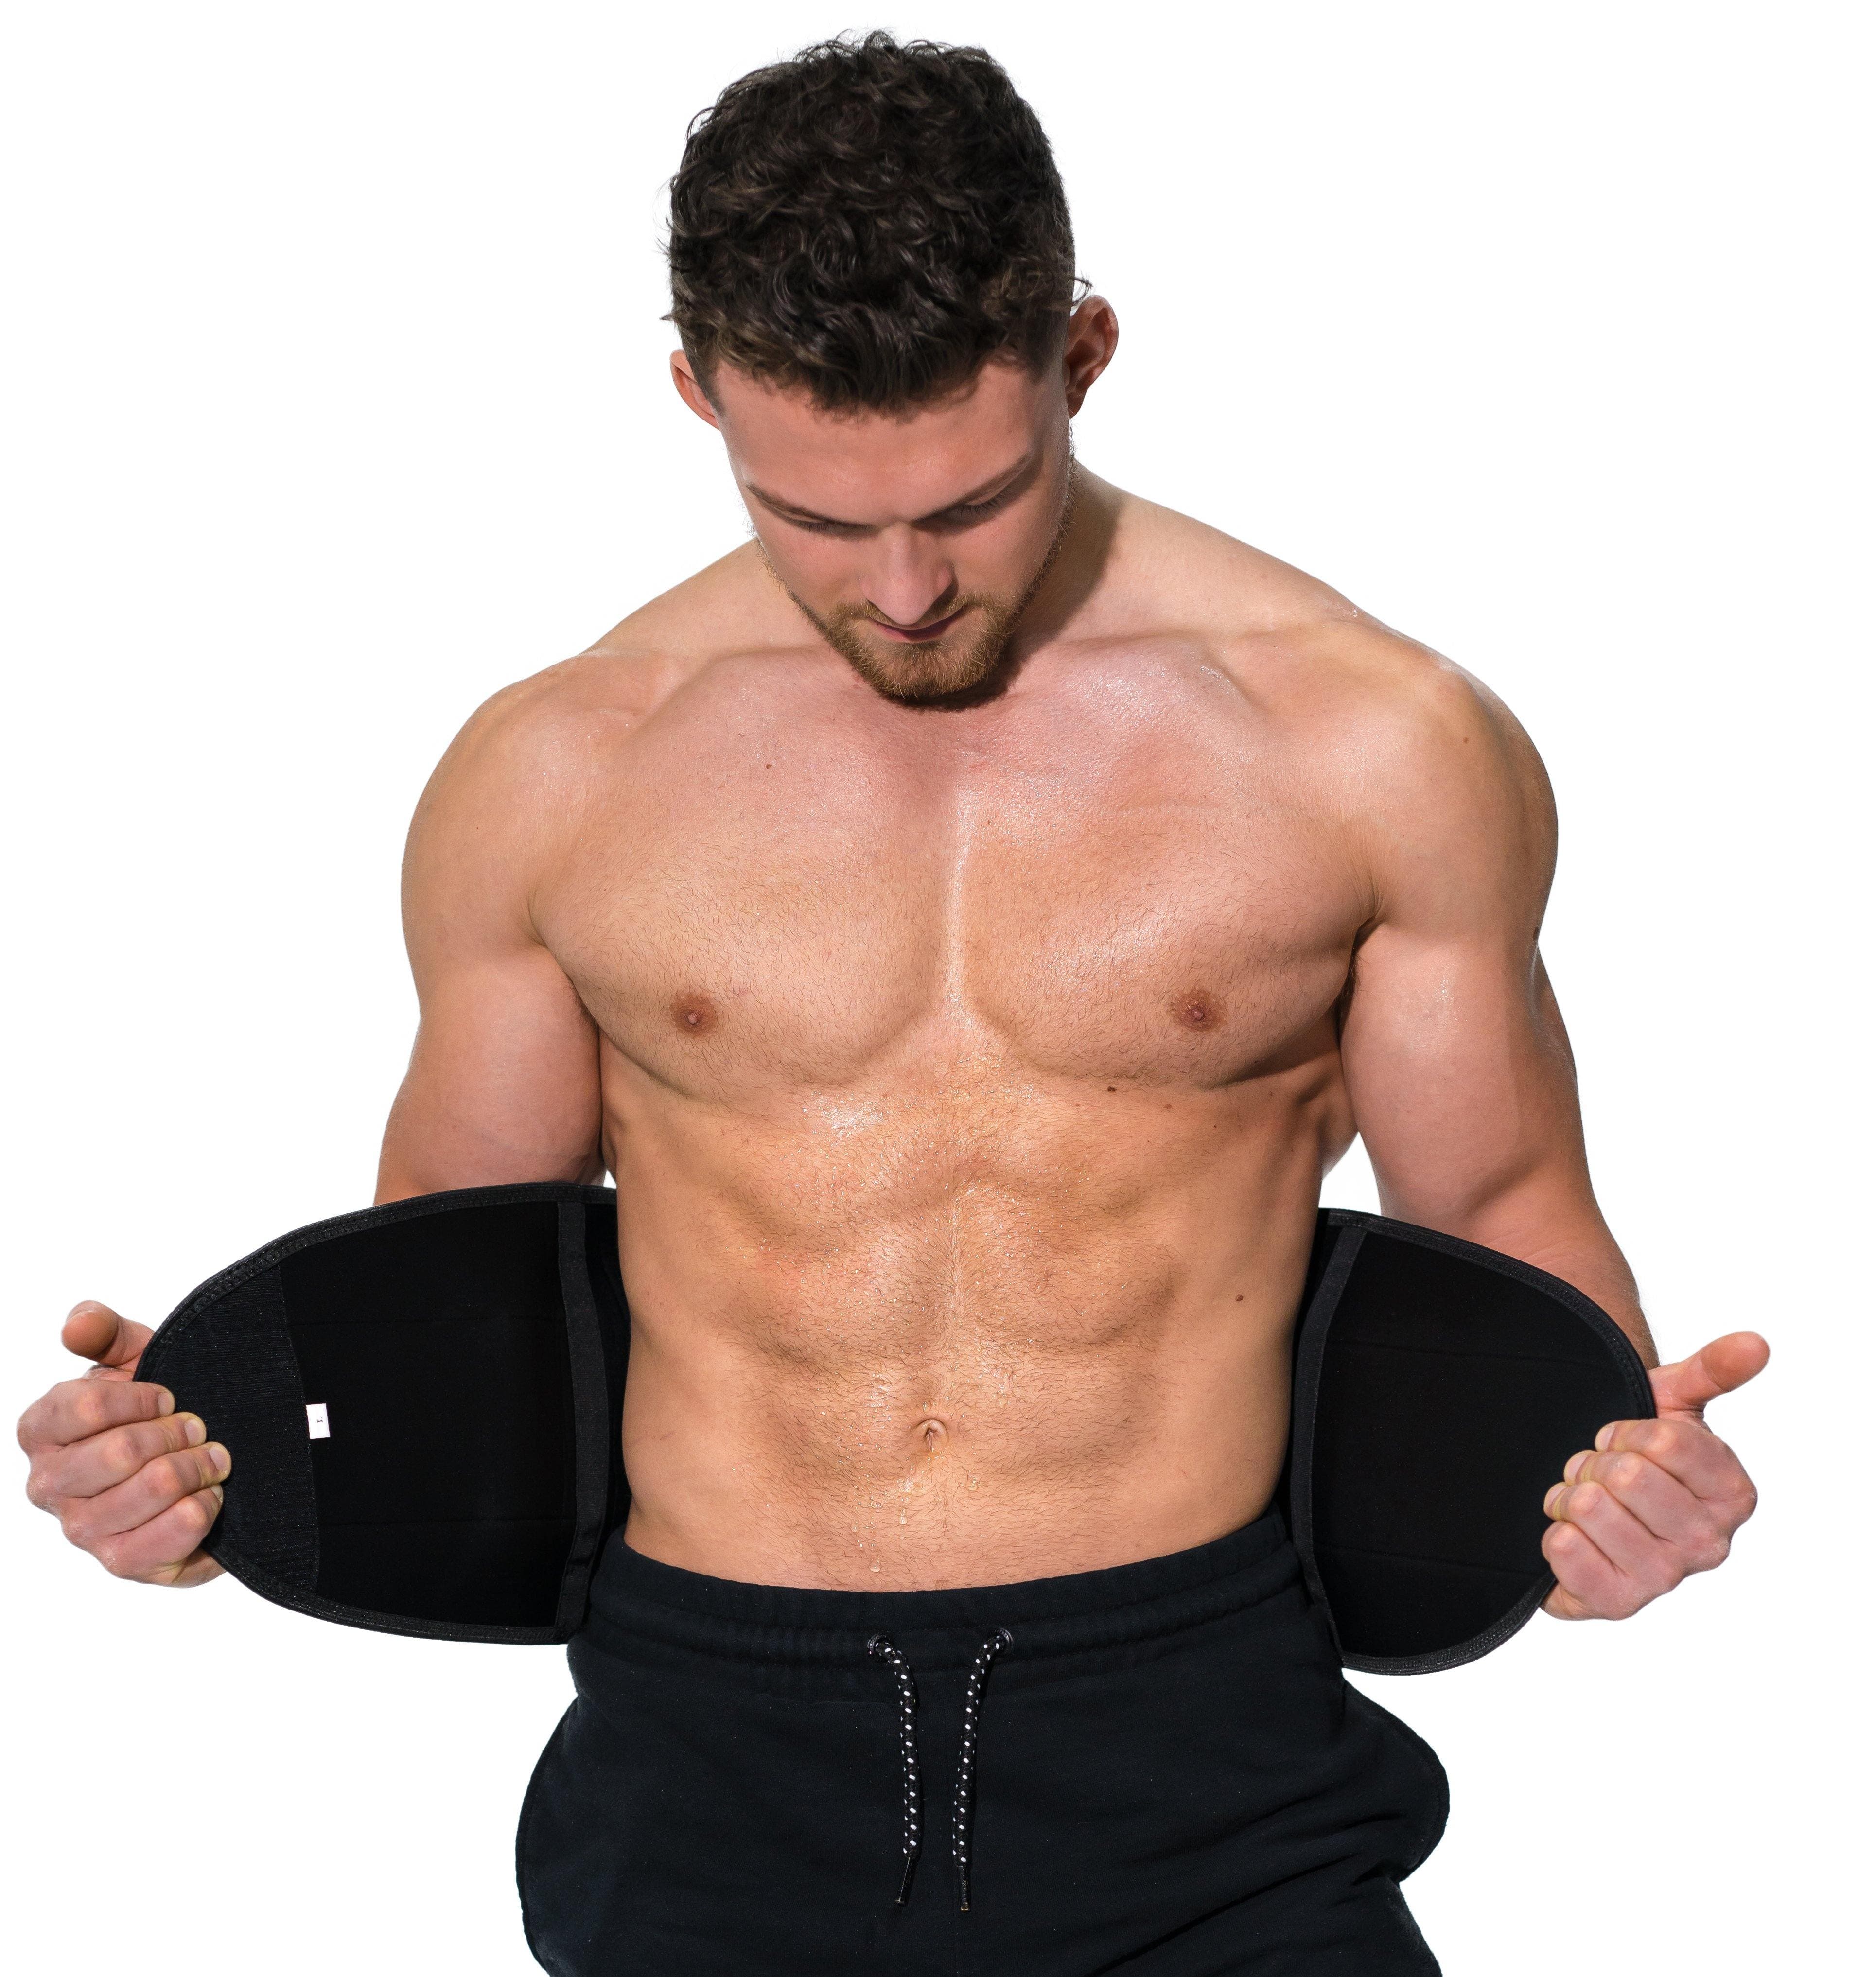 Man modeling the Redge Fit Core Focus Pro Sweat Belt Available at https://www.getredge.com/products/core-pro-pack